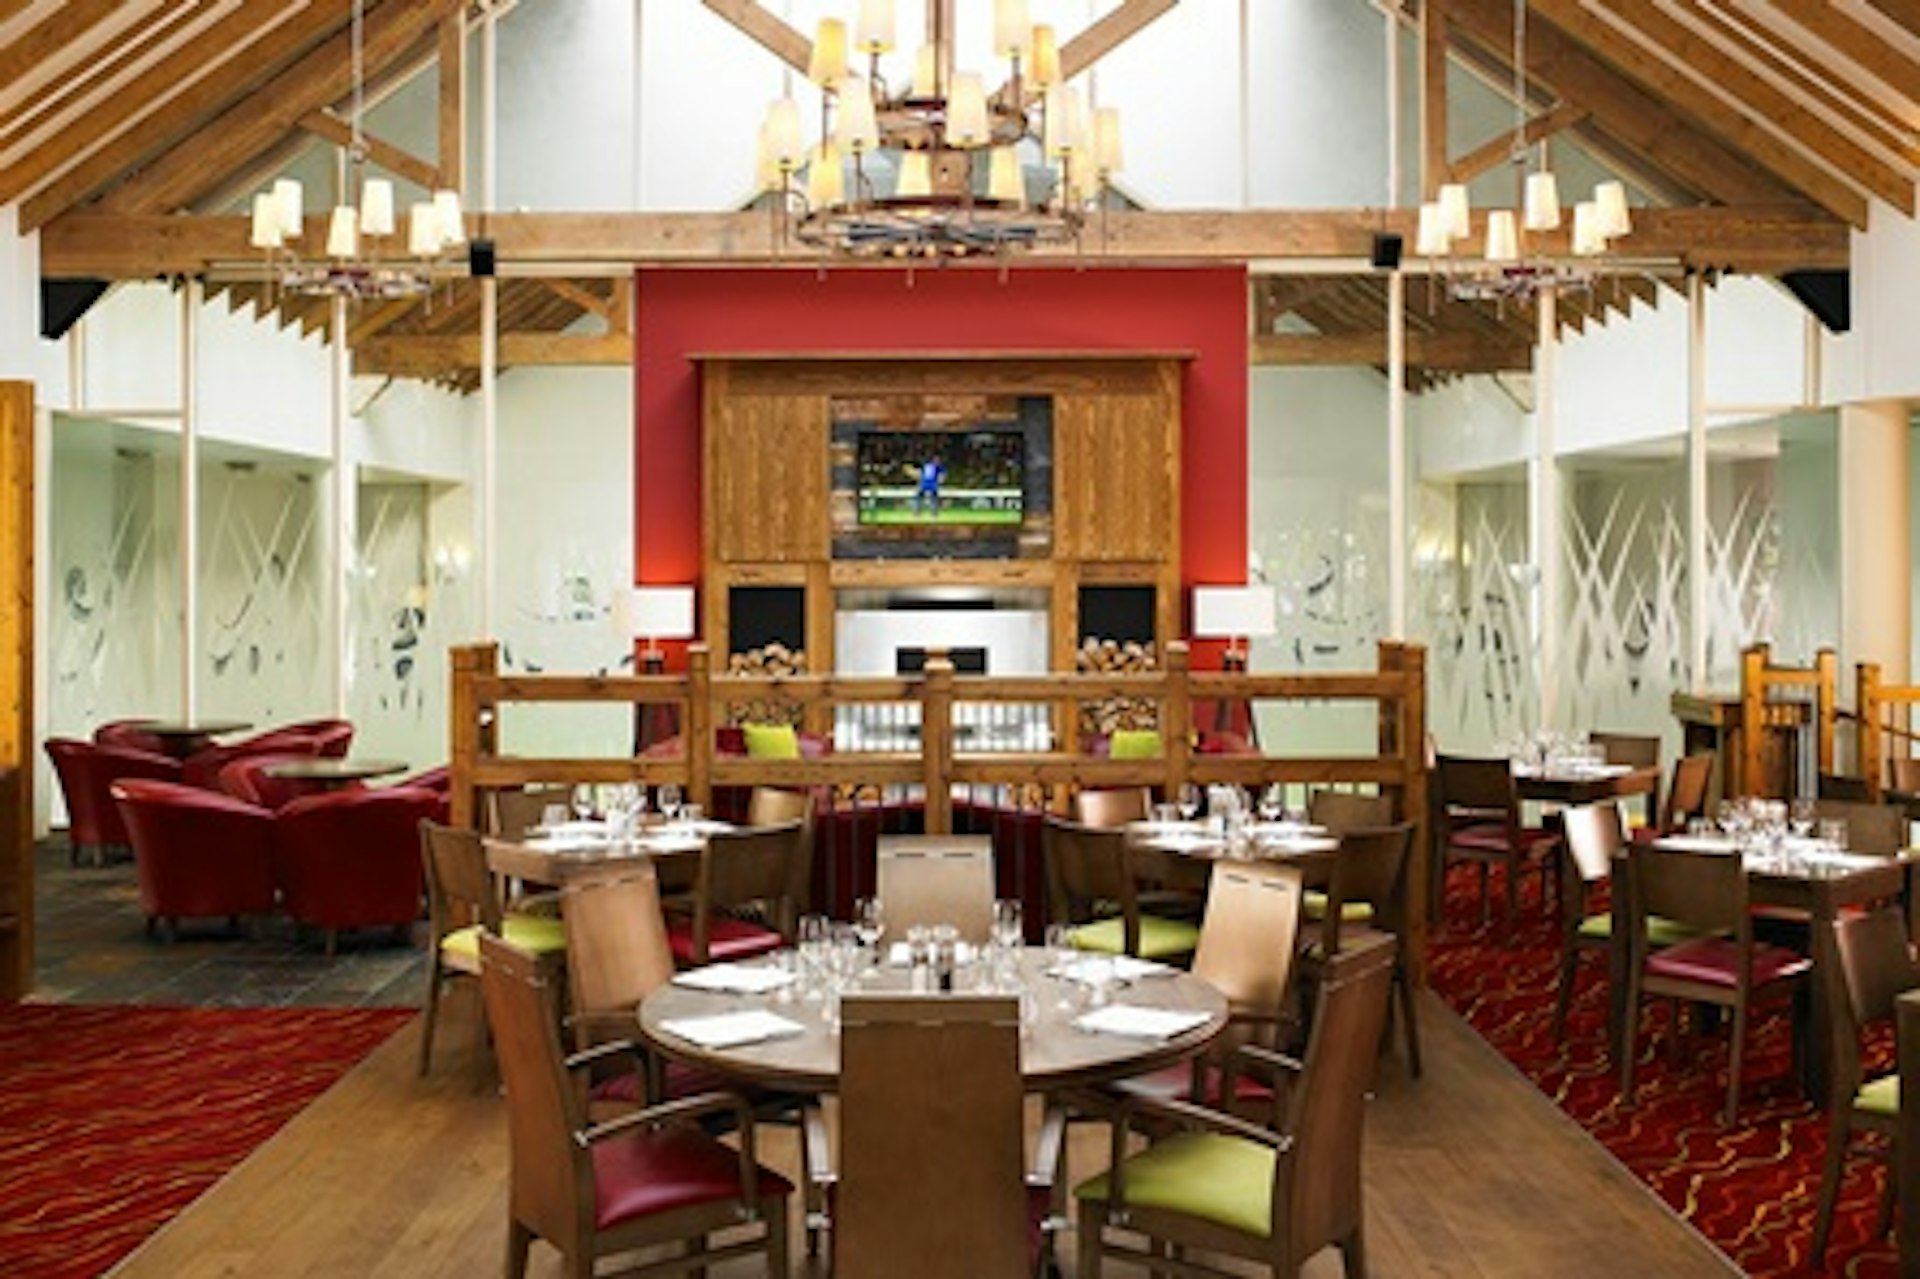 One Night Scottish Break with Dinner for Two at the 4* Dalmahoy Hotel & Country Club, Edinburgh 3